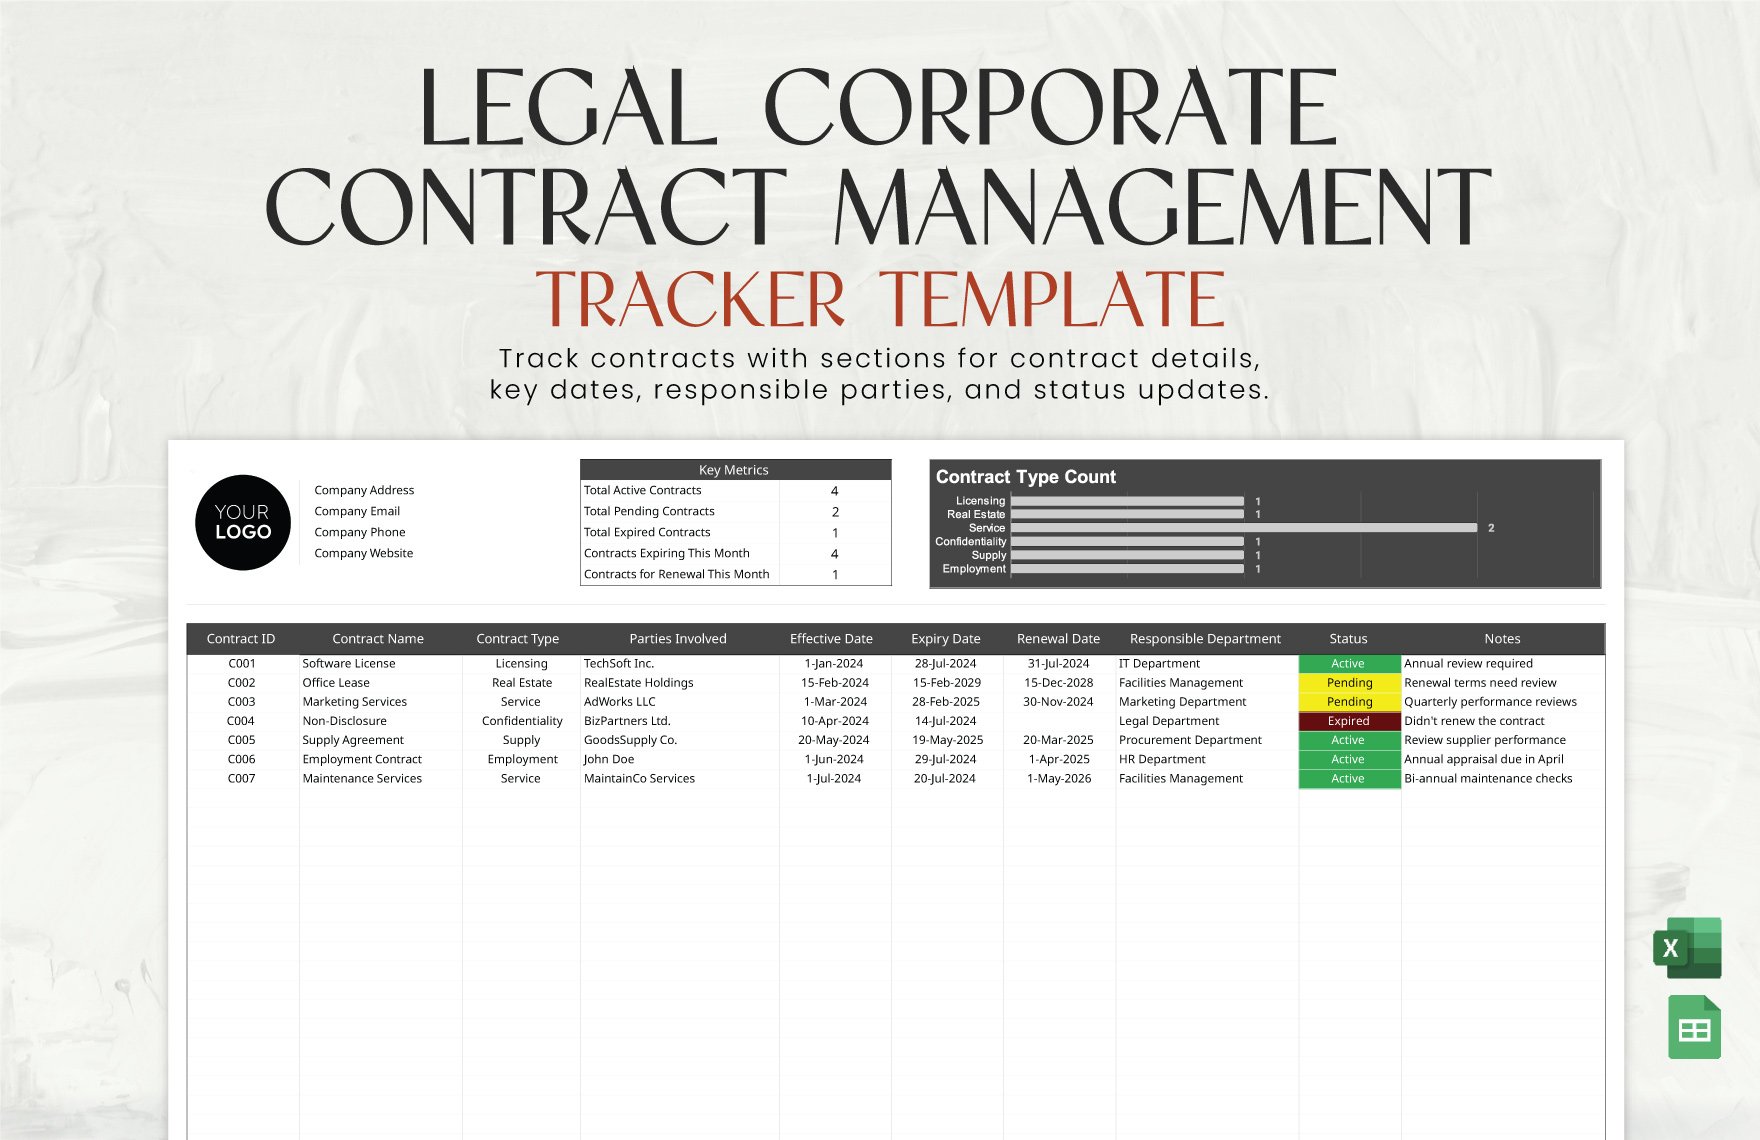 Legal Corporate Contract Management Tracker Template in Excel, Google Sheets